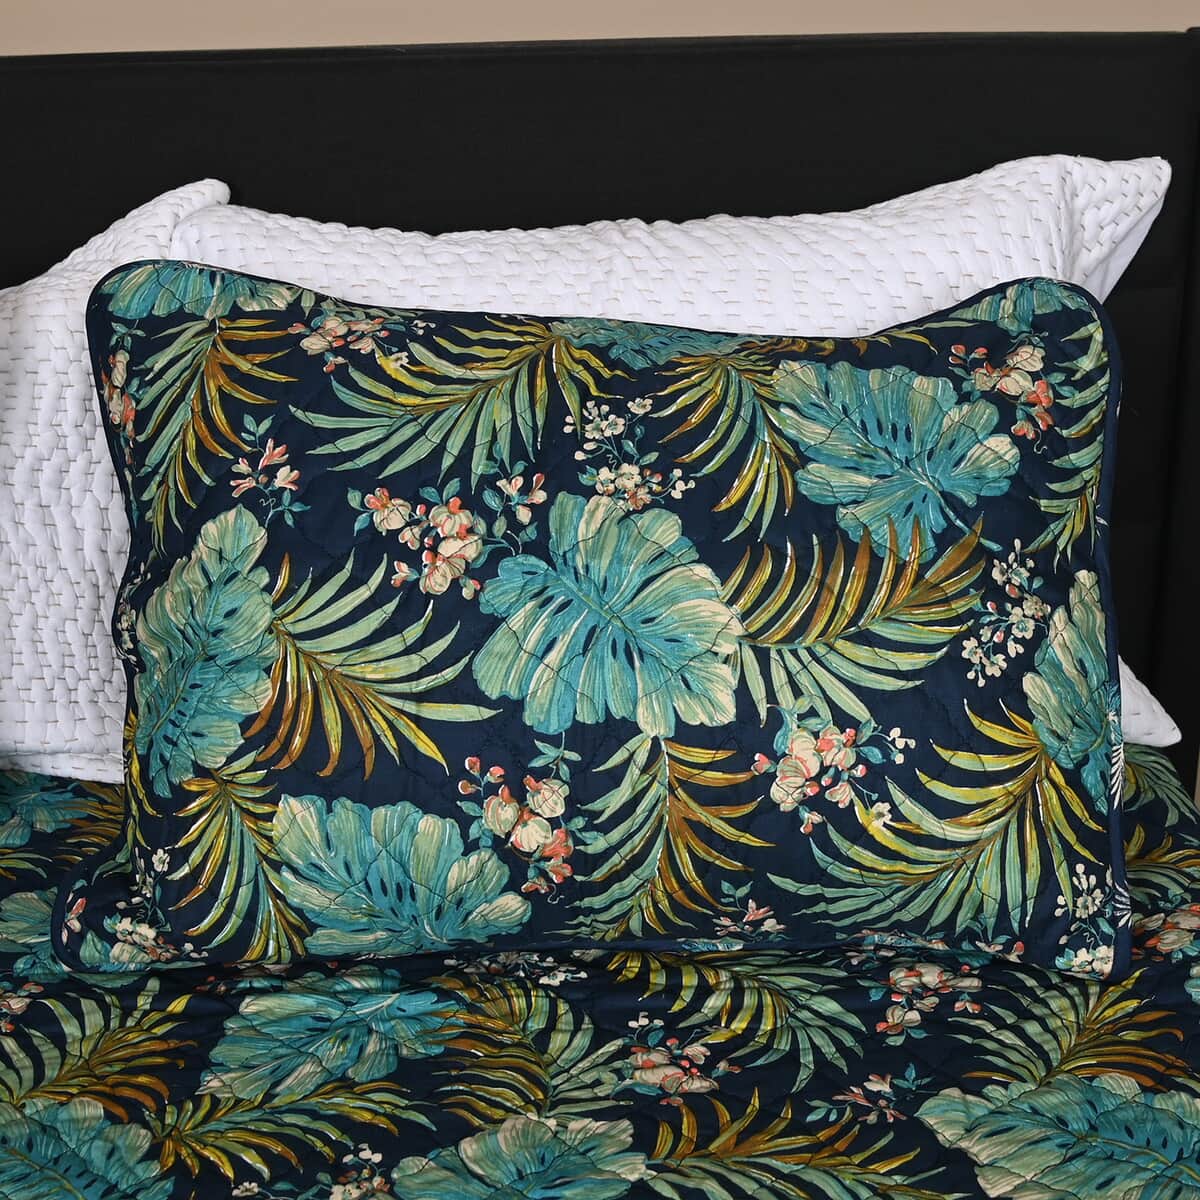 SEASIDE VILLA 3pc Navy Blue and Green Leaf Disperse Print Quilt Set - Blue (Queen) image number 1